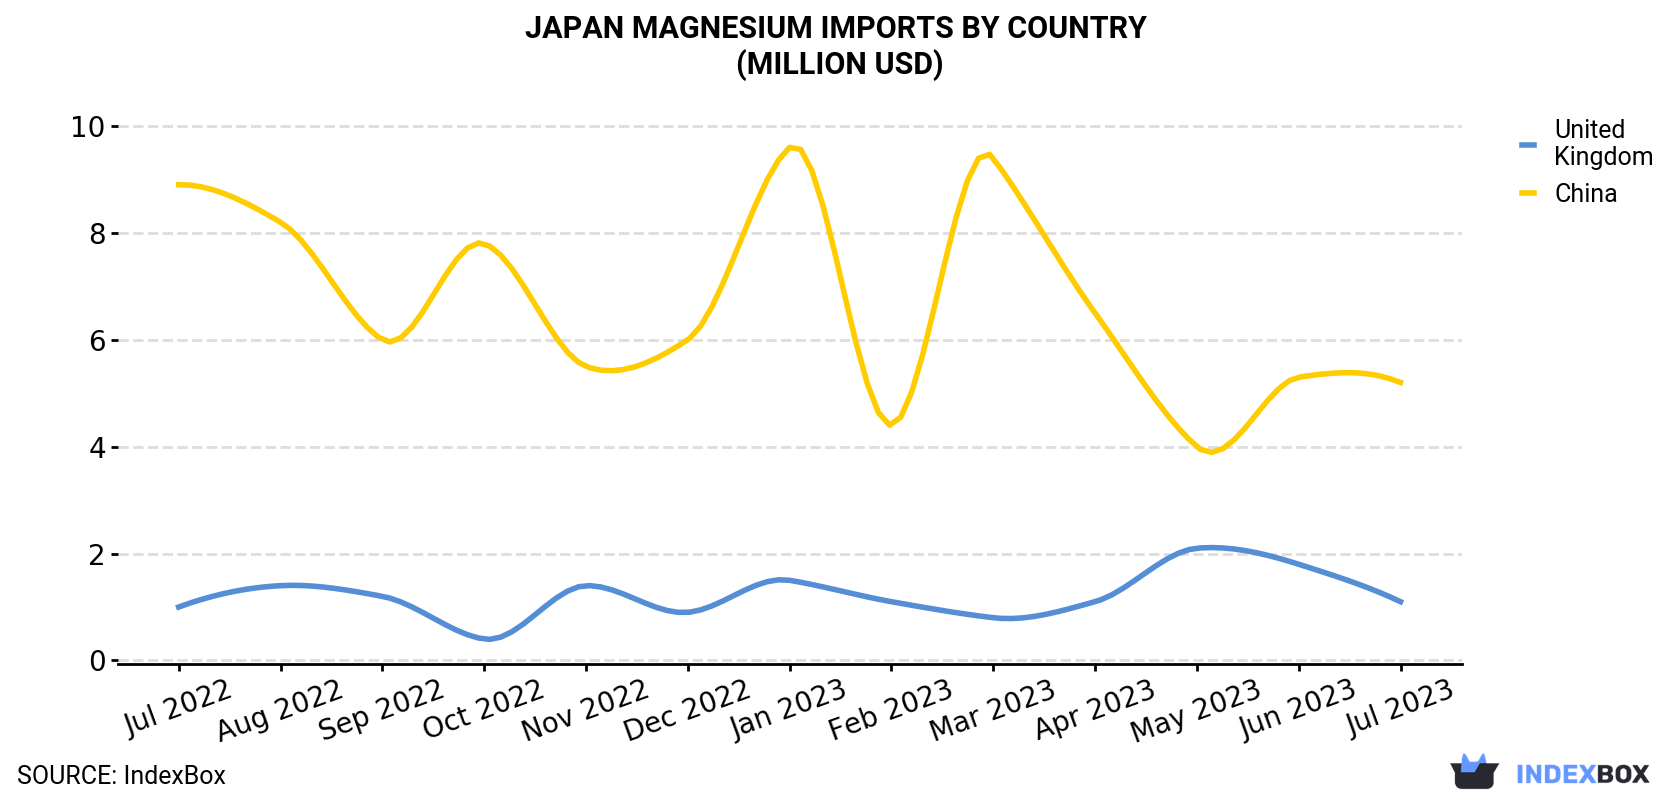 Japan Magnesium Imports By Country (Million USD)